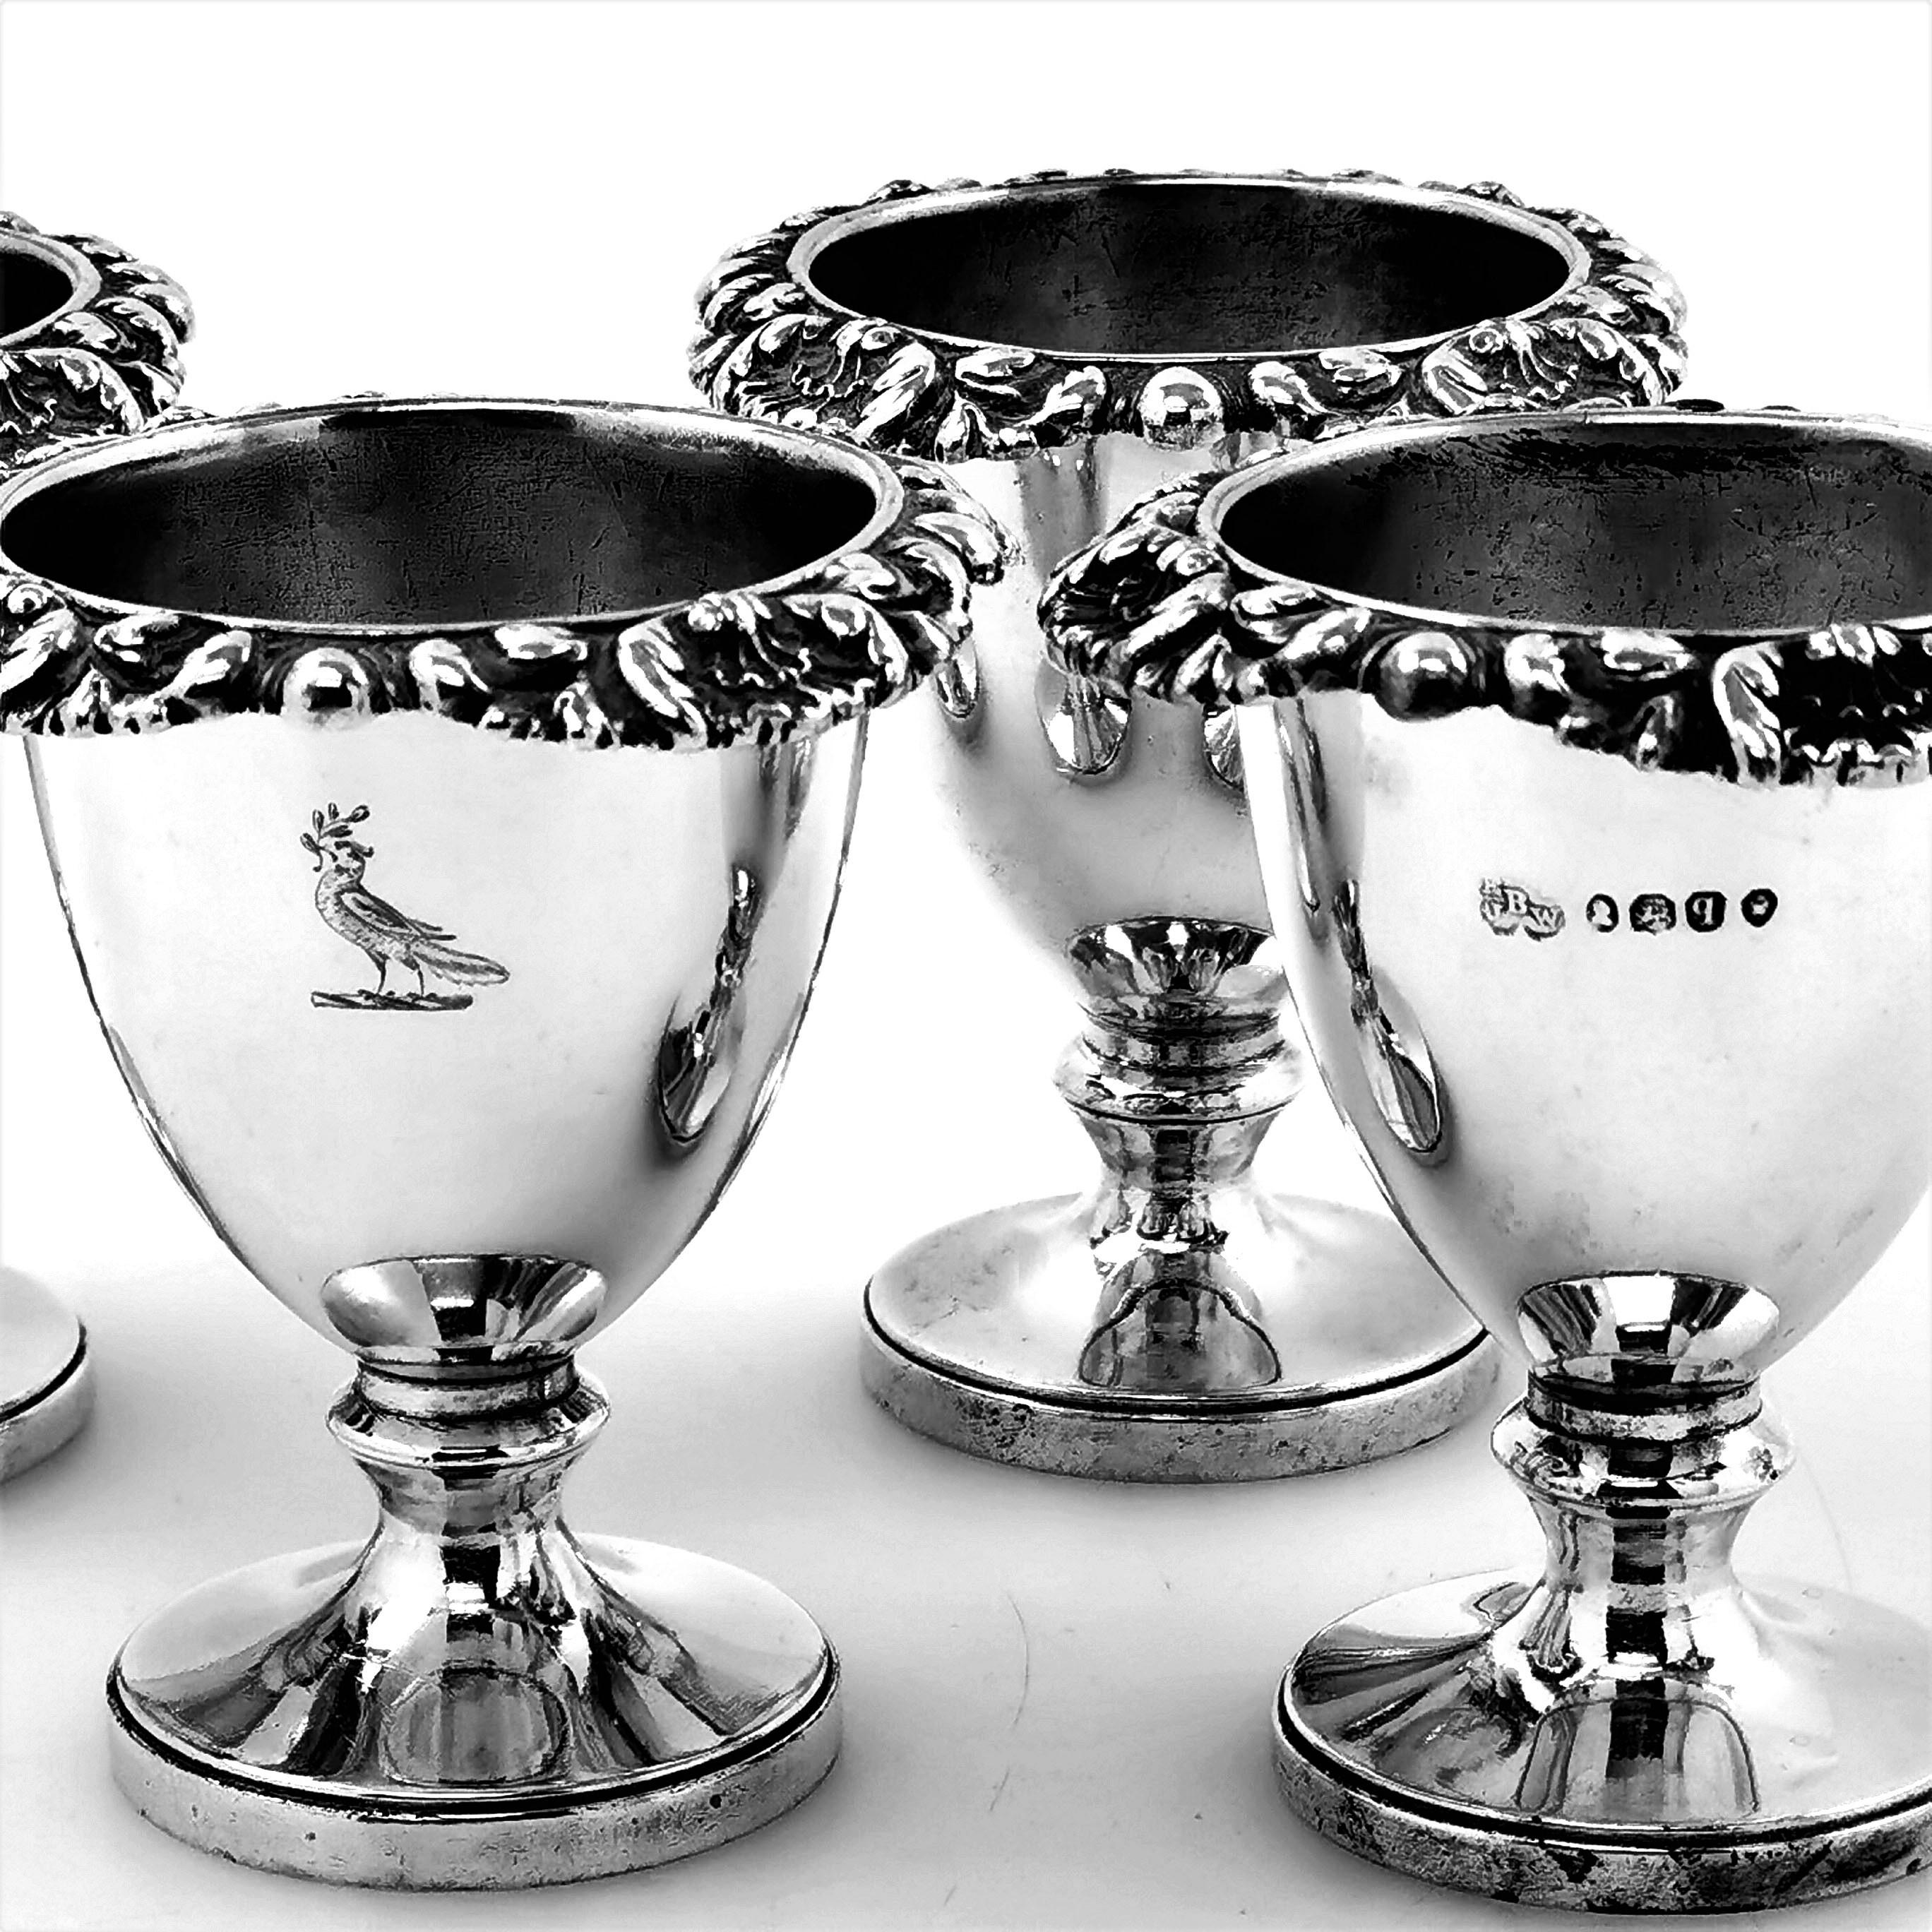 19th Century Antique William IV Sterling Silver Egg Cruet Stand 1831 Four Egg Cup Set